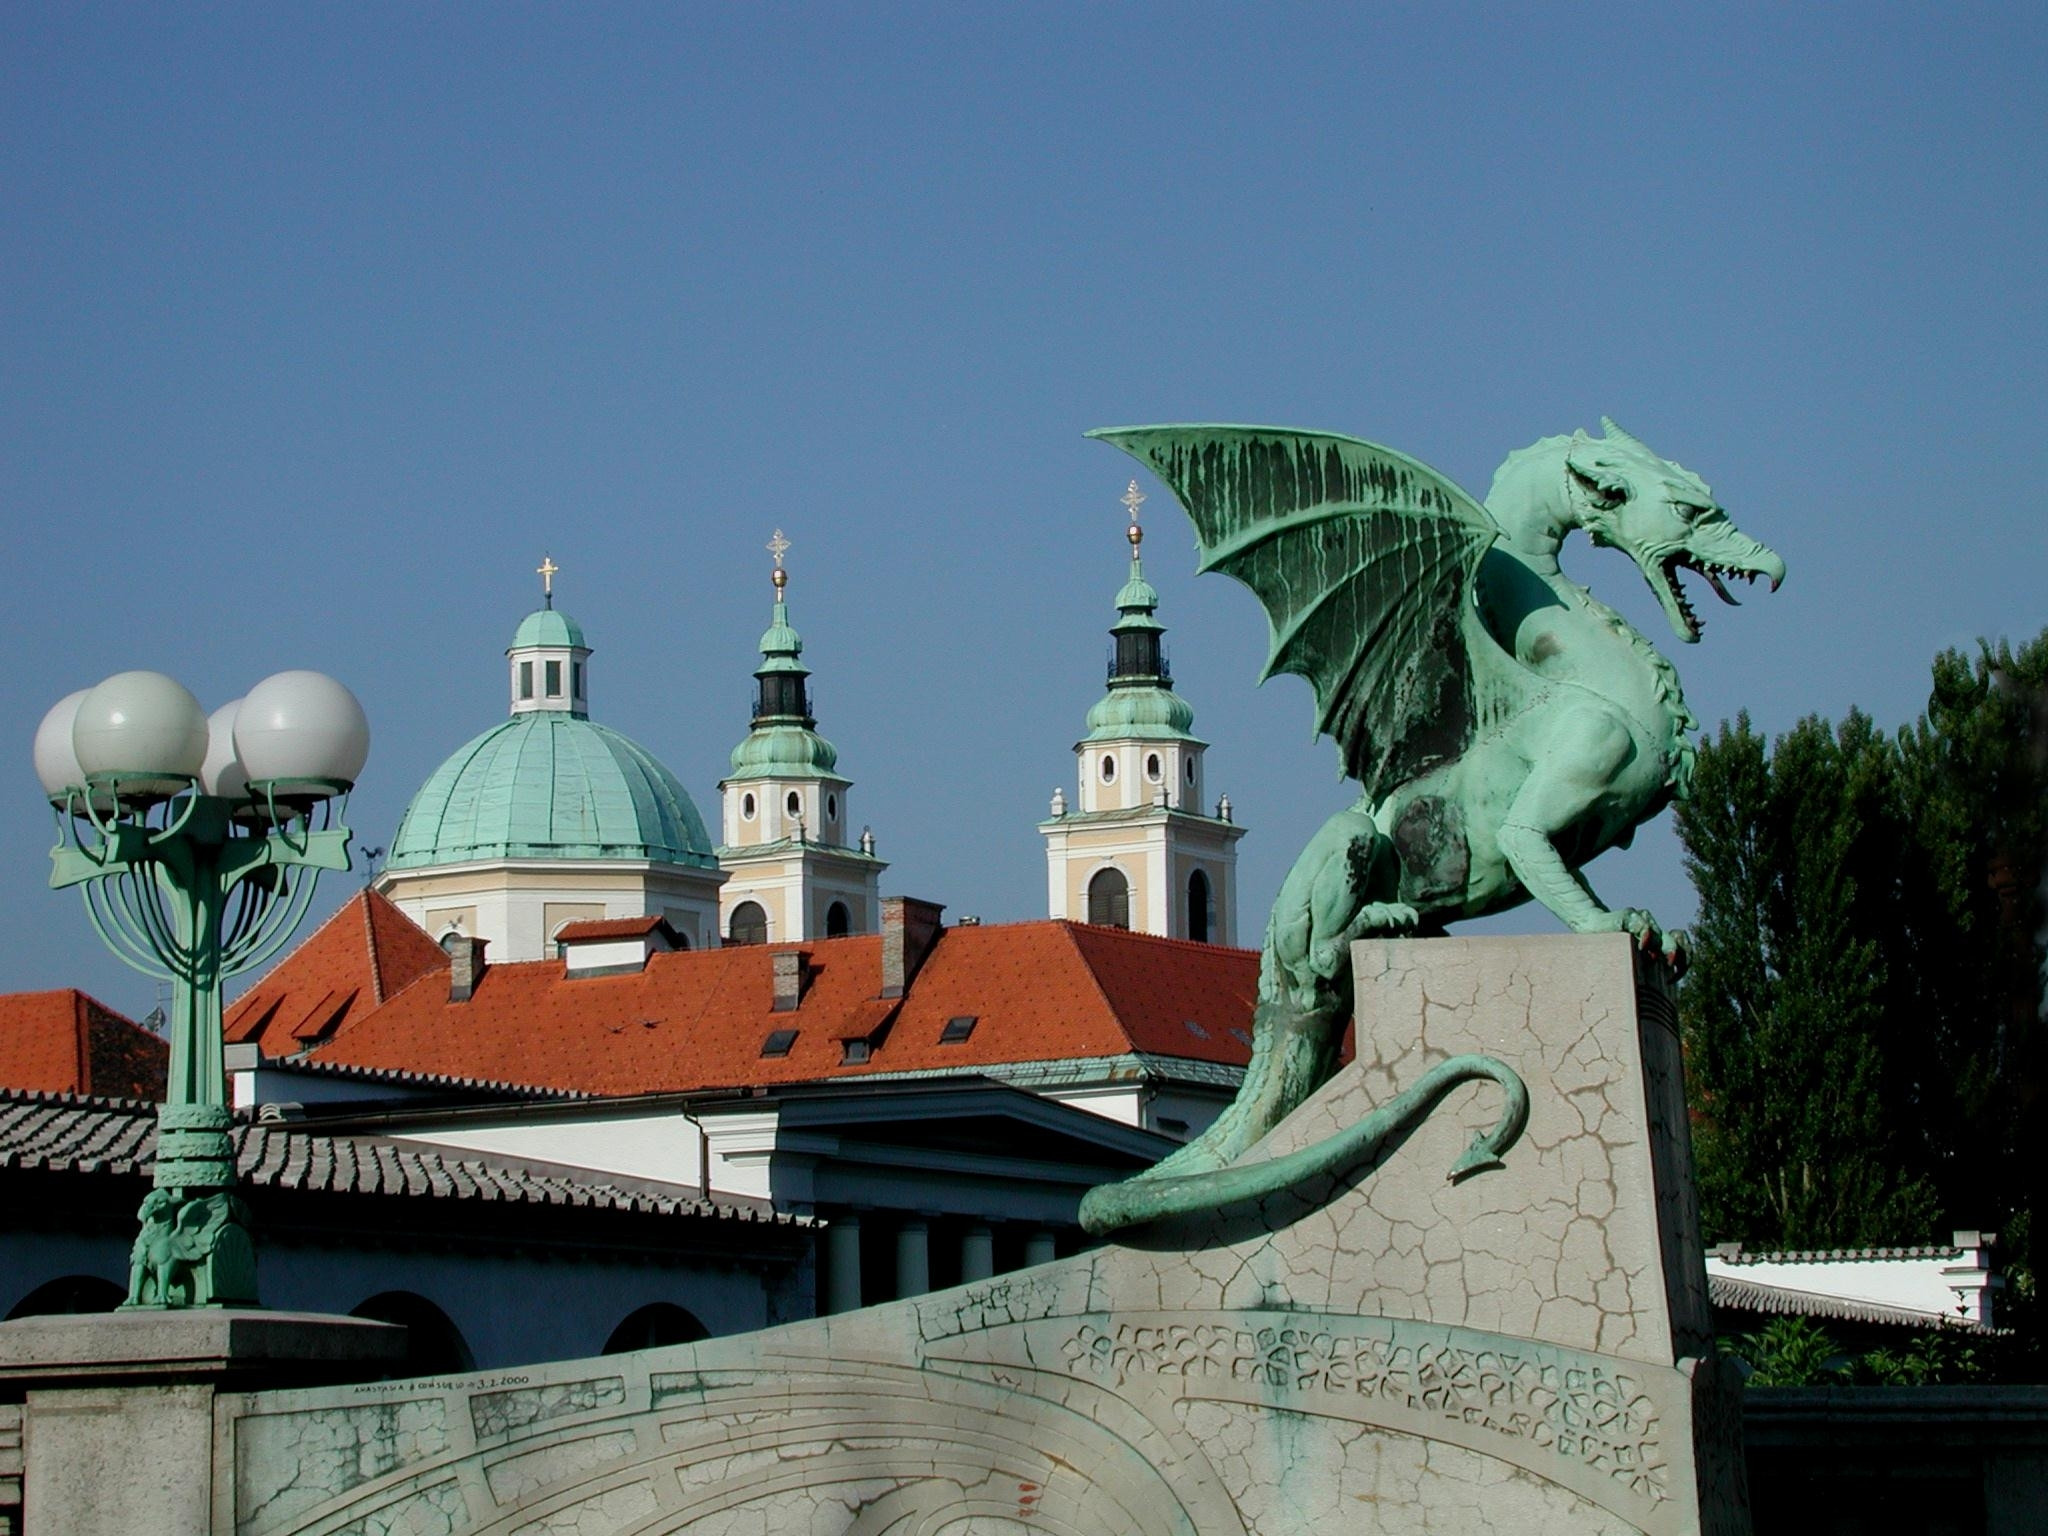 Ljubljana’s dragon for the winner of 2nd stage